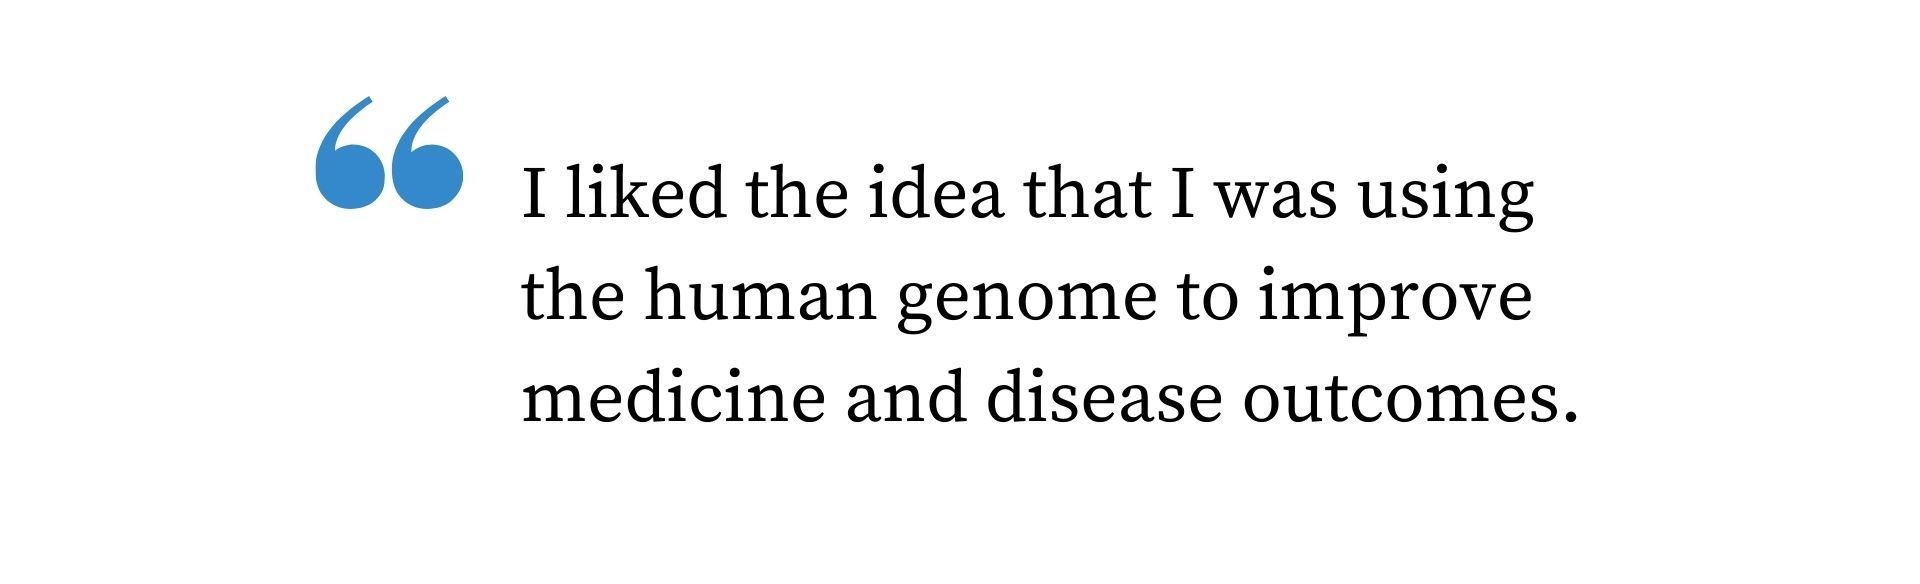 Quote: I liked the idea that I was using the human genome to improve medicine and disease outcomes. 